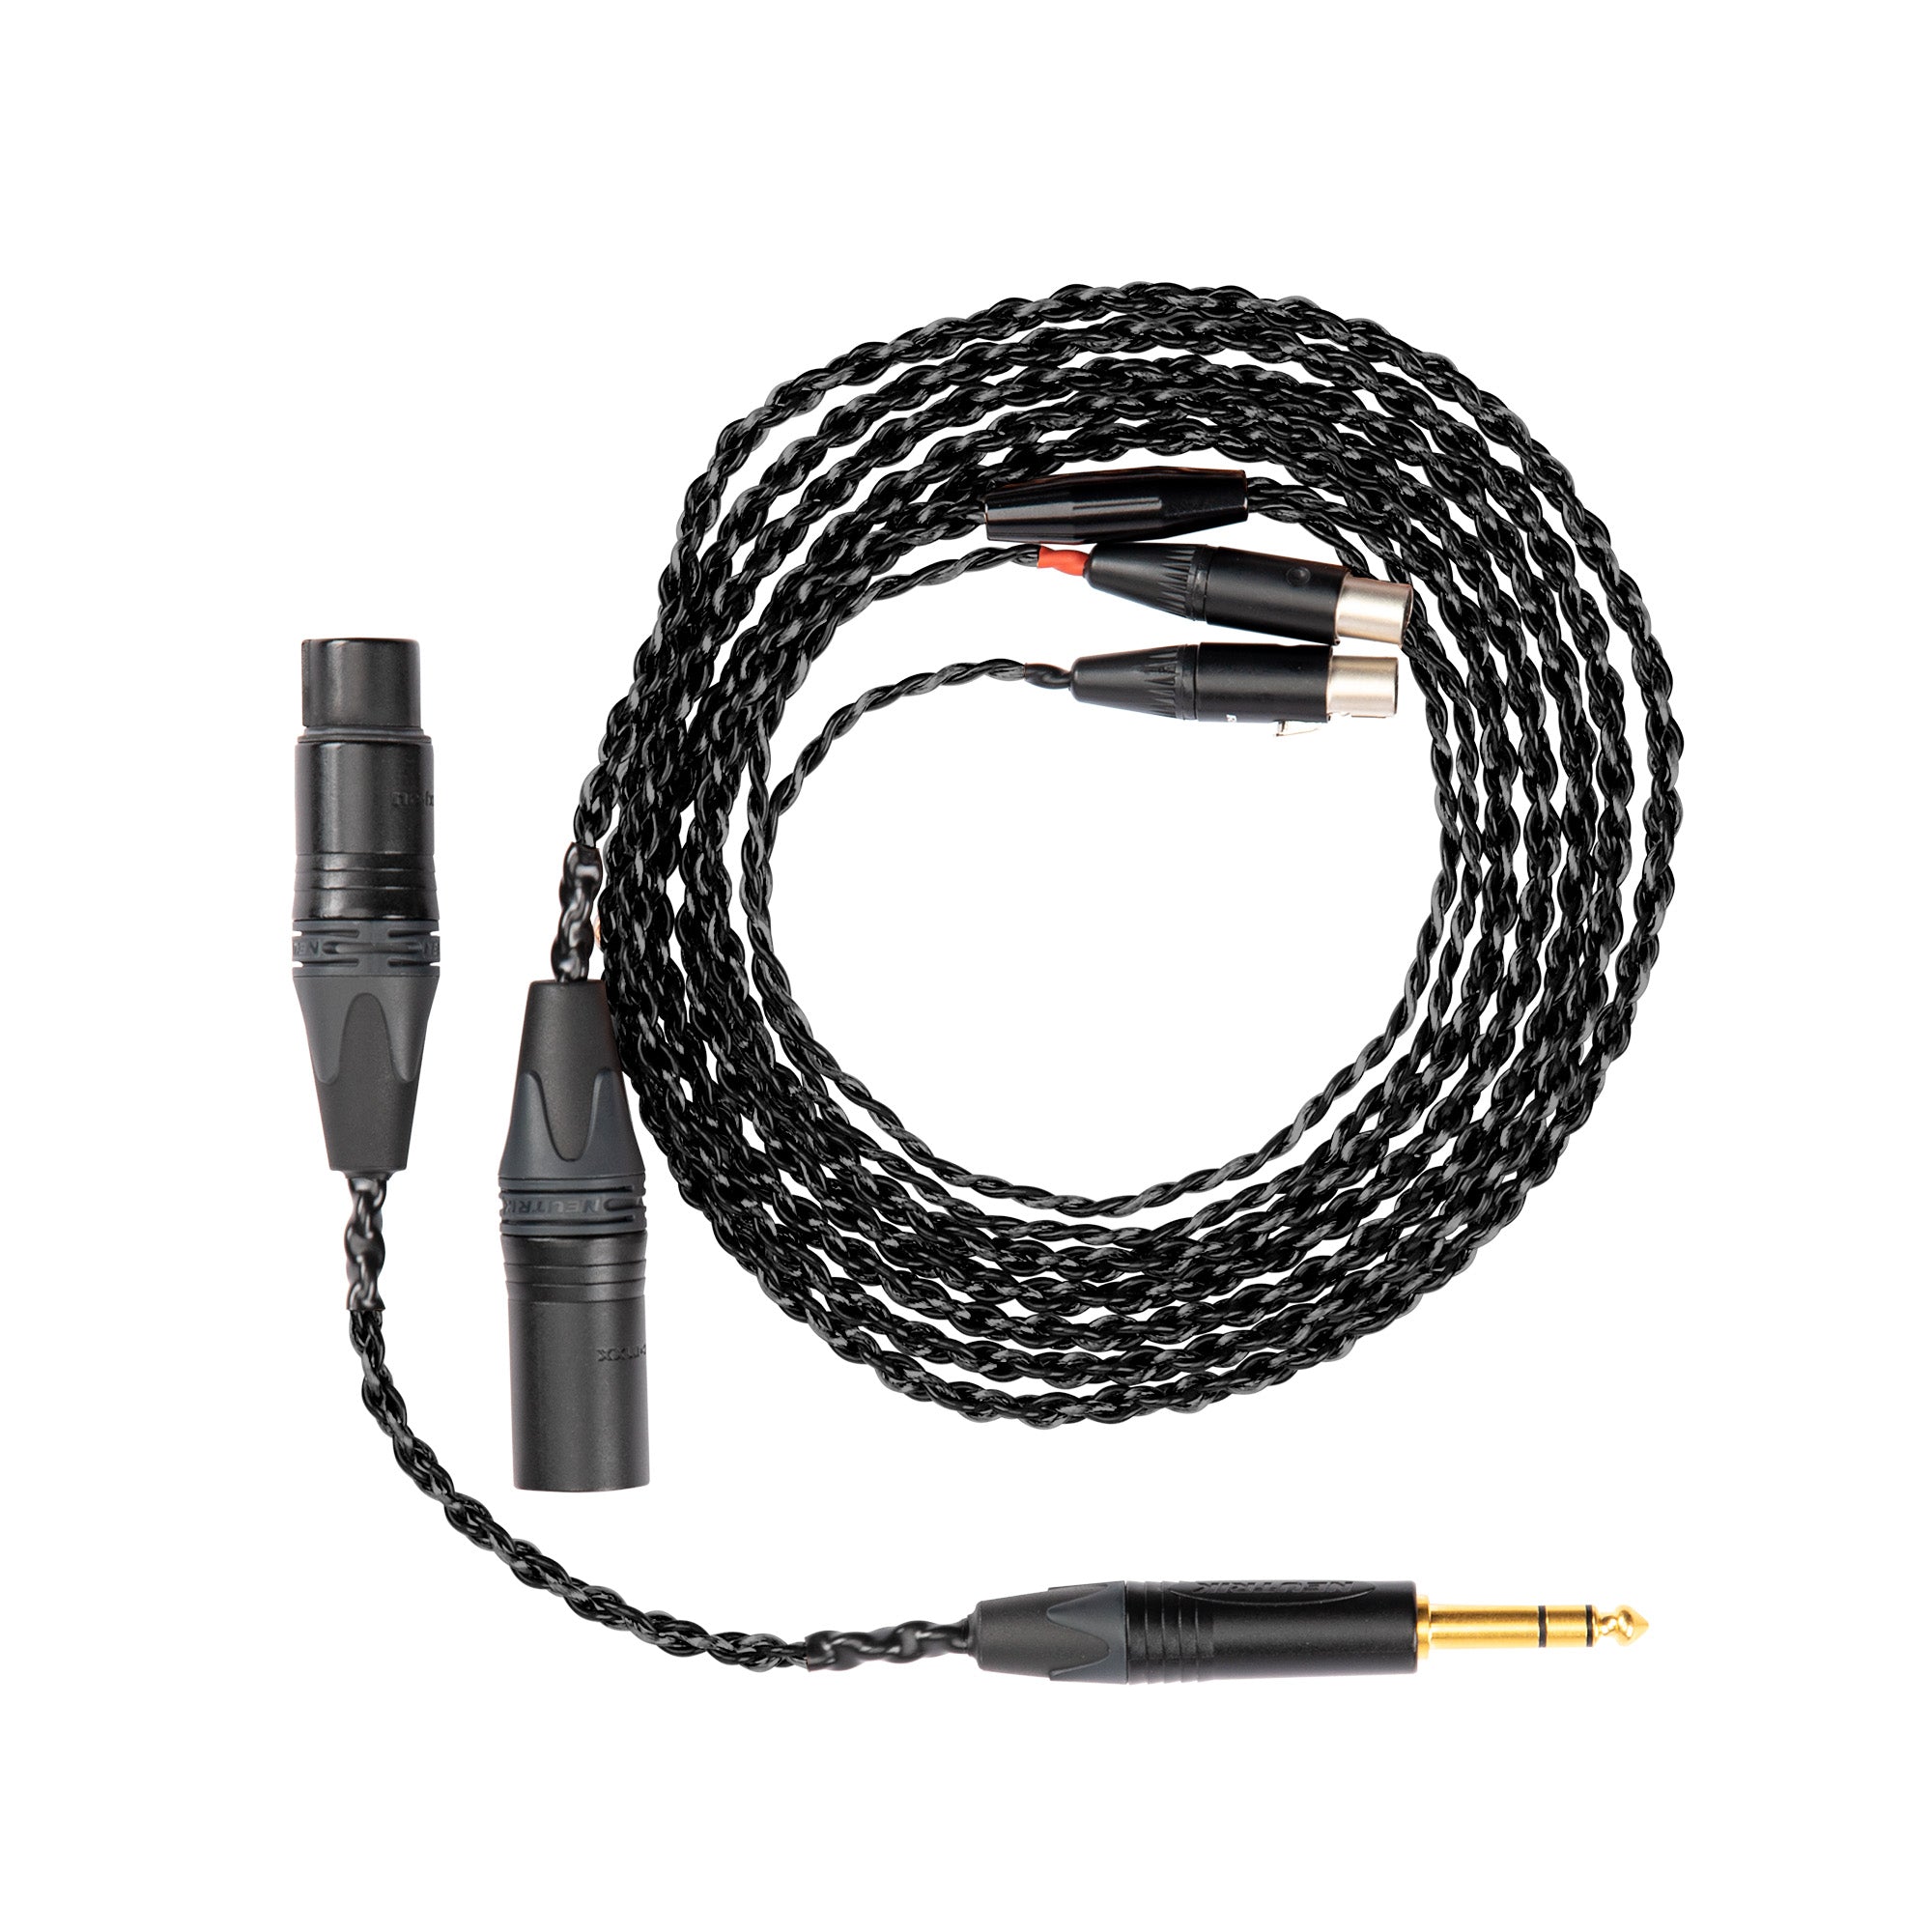 LCD Standard Combo Cable - Balanced XLR with 1/4 Single-ended